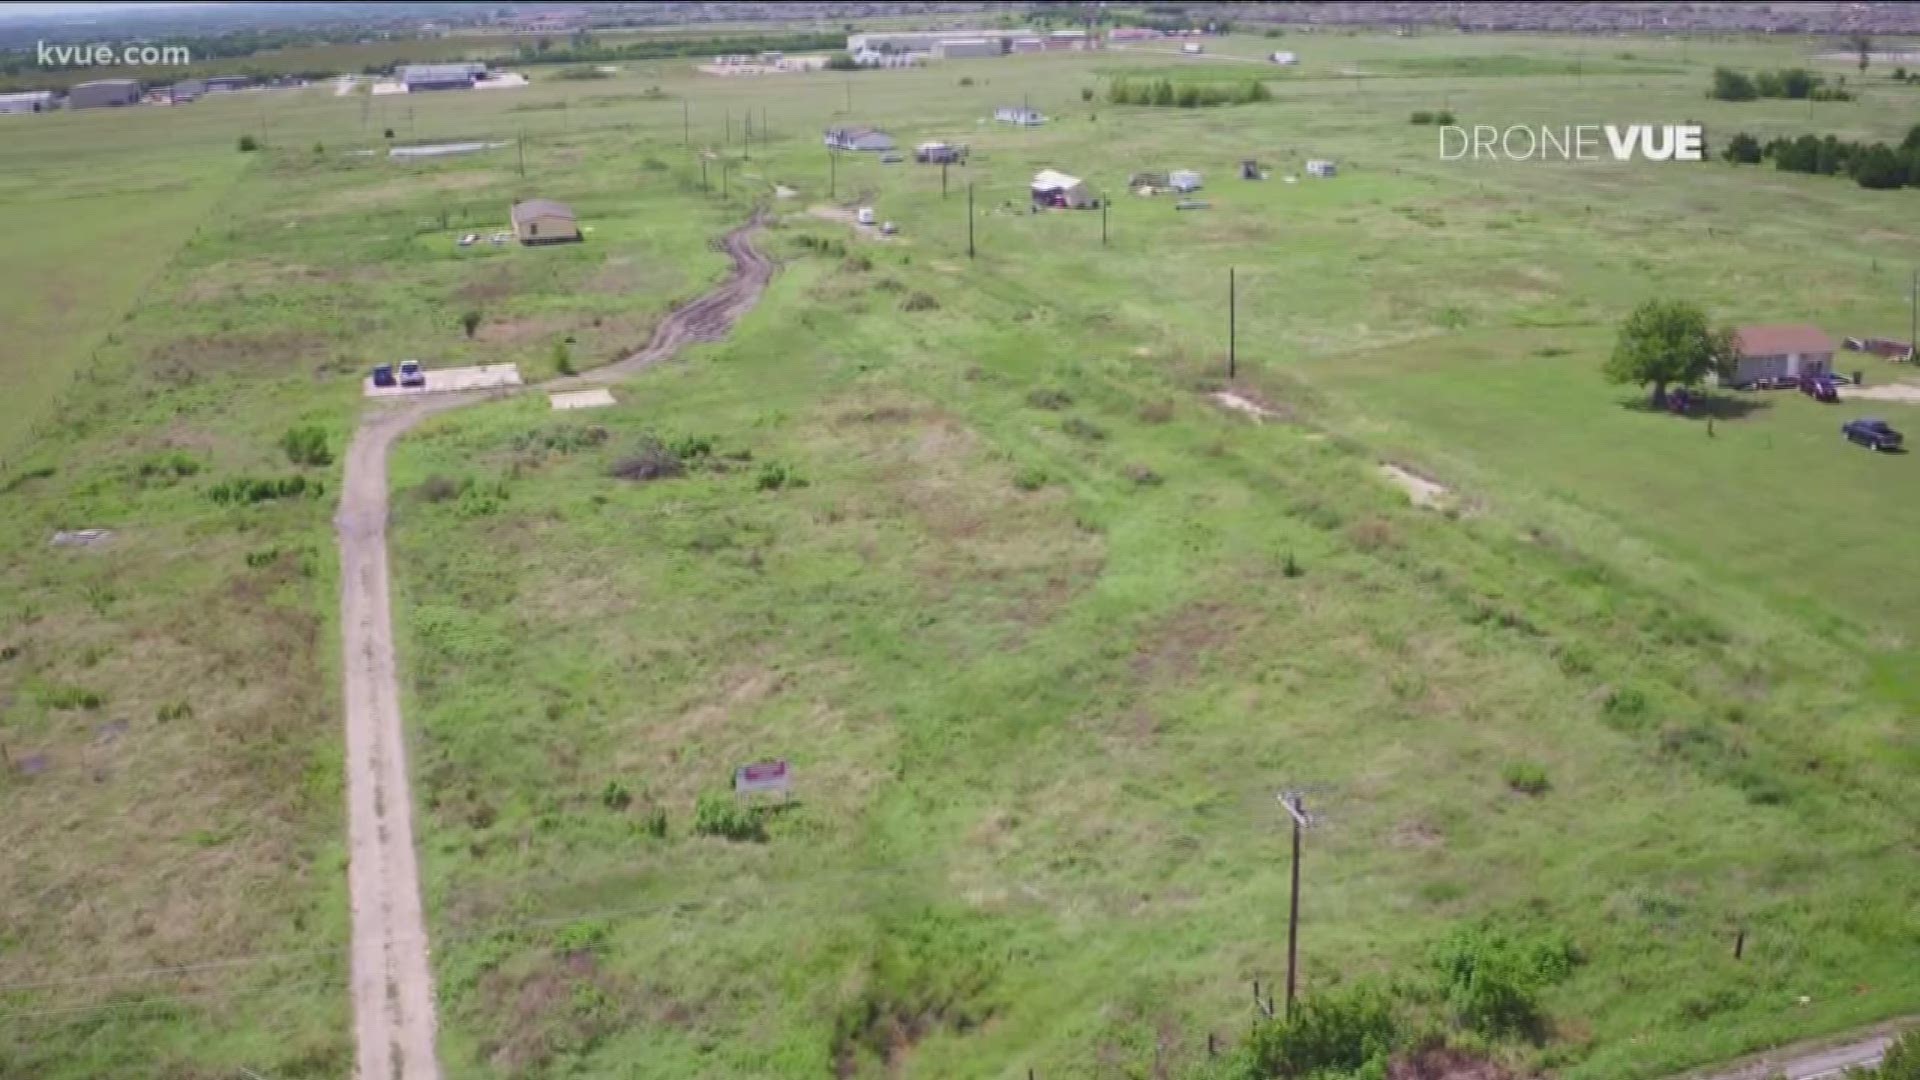 The new lawsuit from Travis County and the State of Texas is claiming "public nuisance."